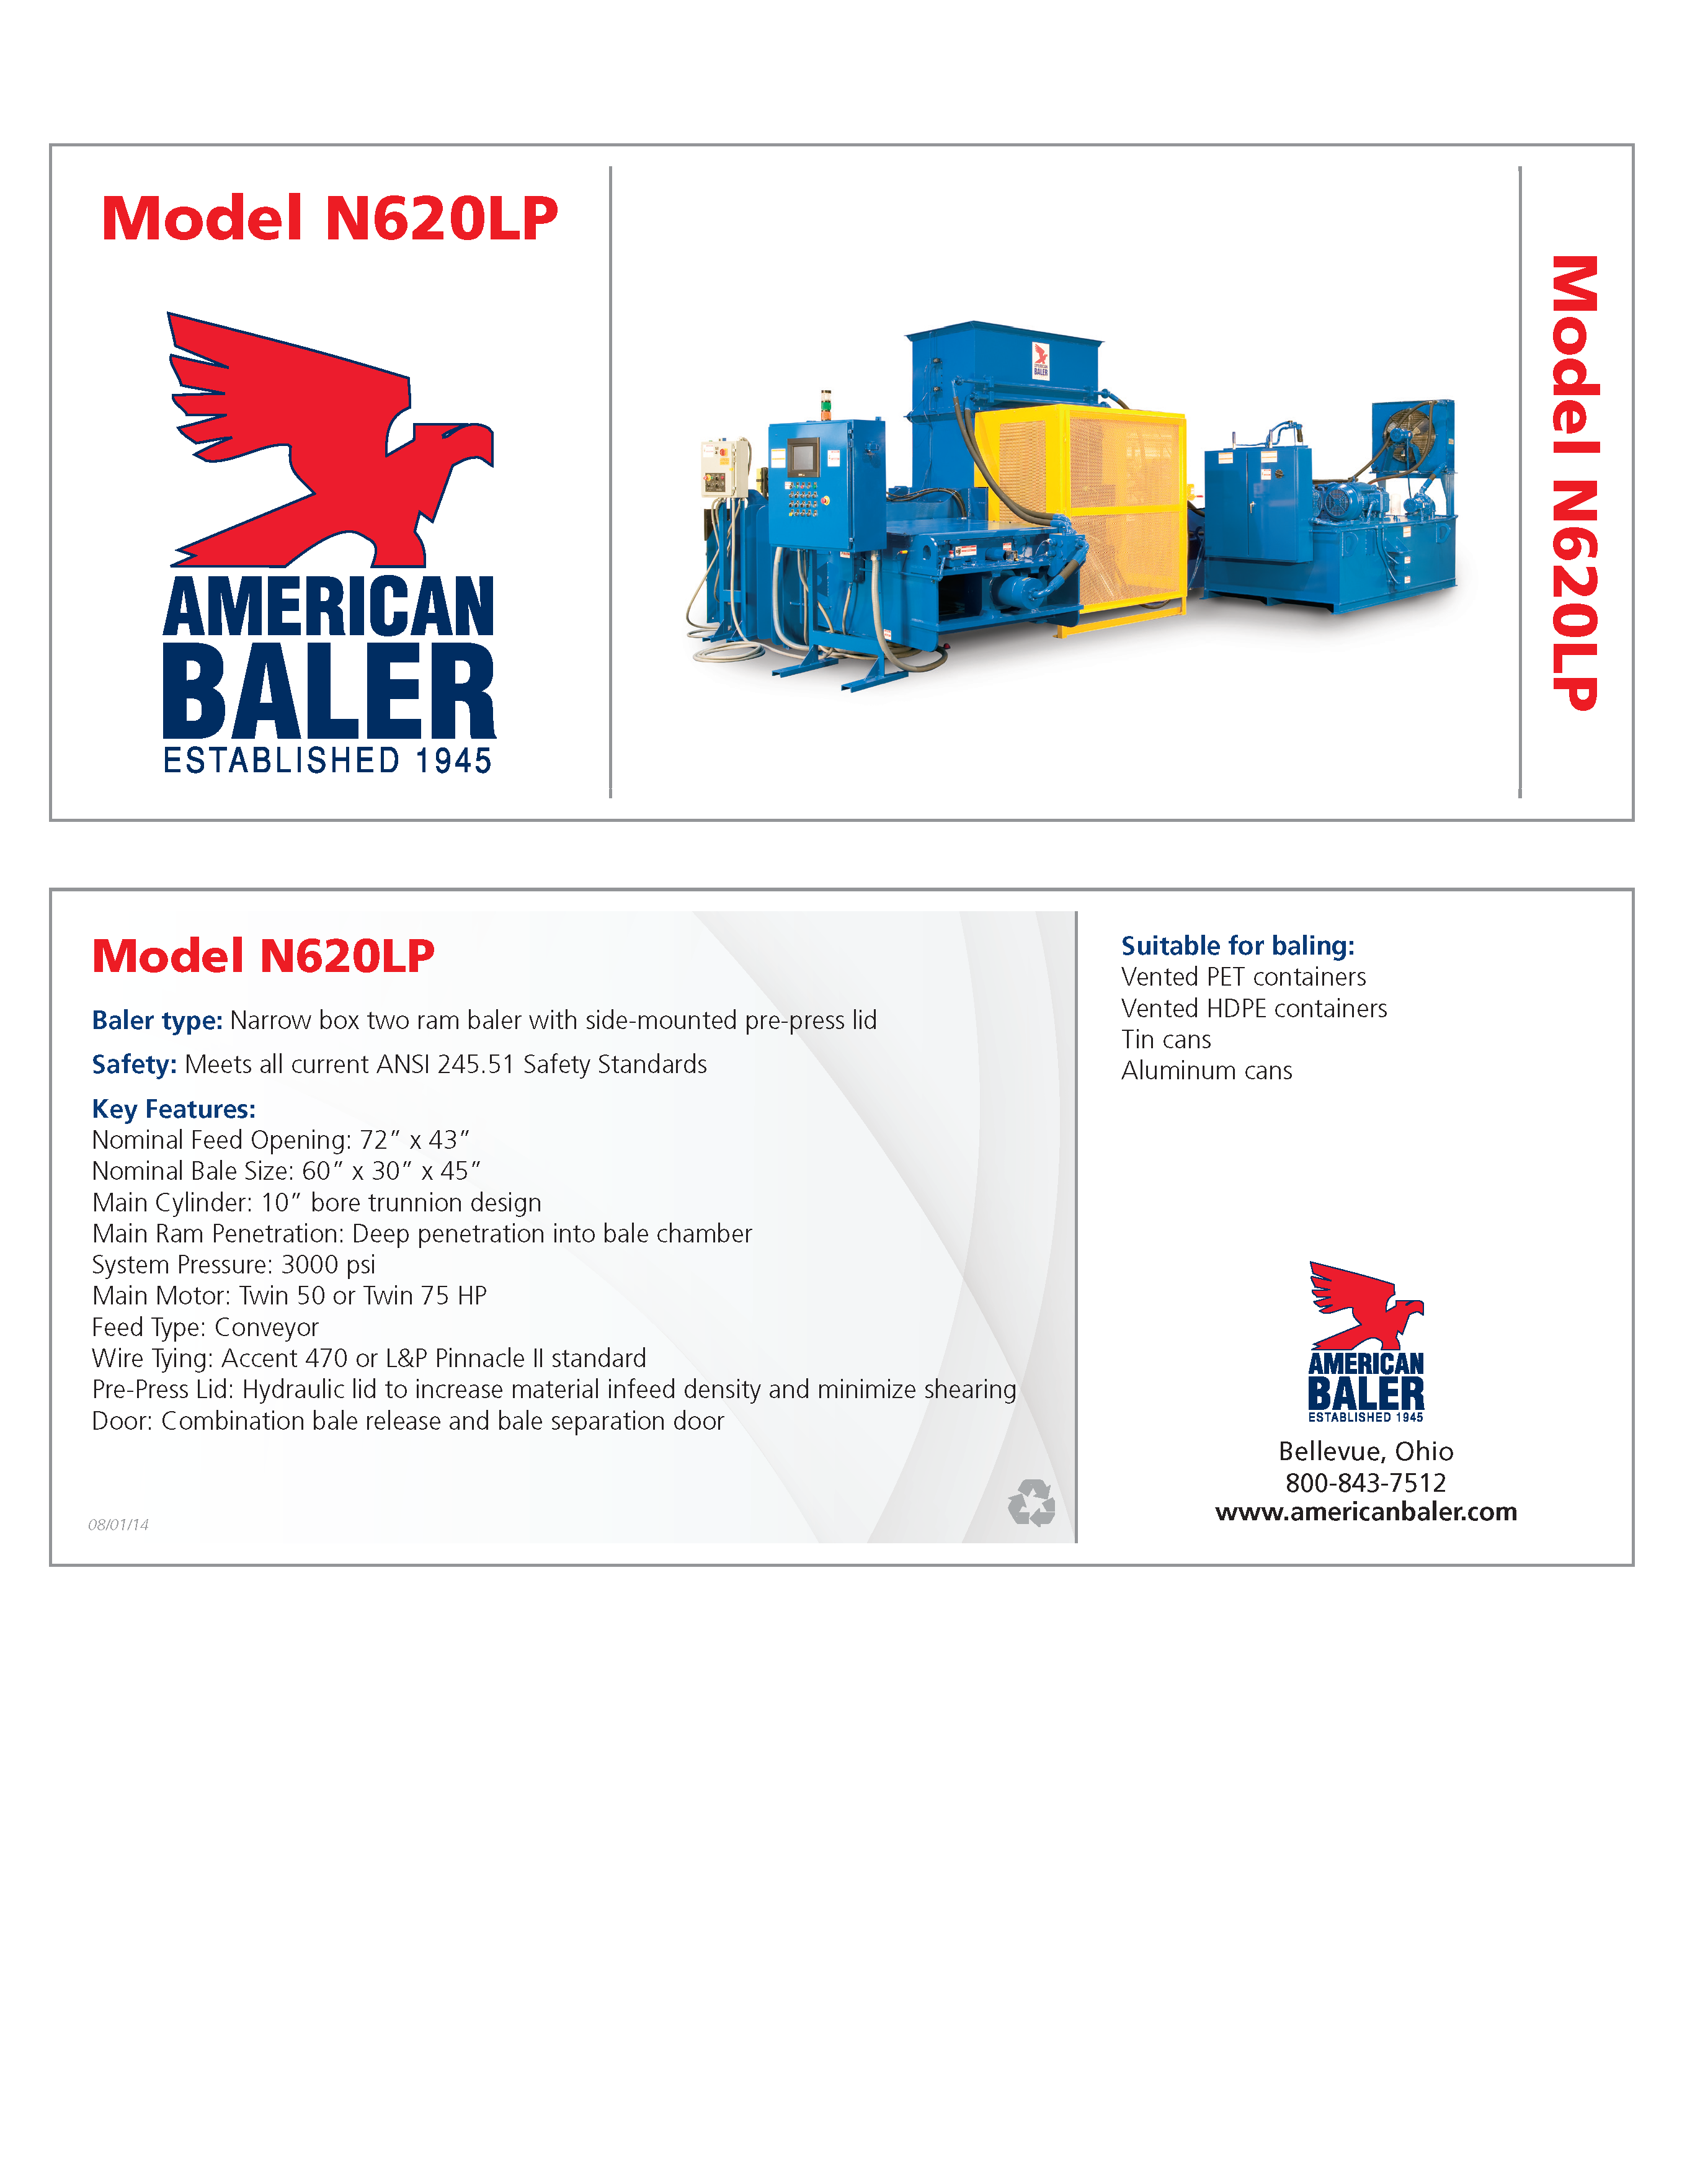 Learn more about the N620LP Baler in the American Baler Brochure